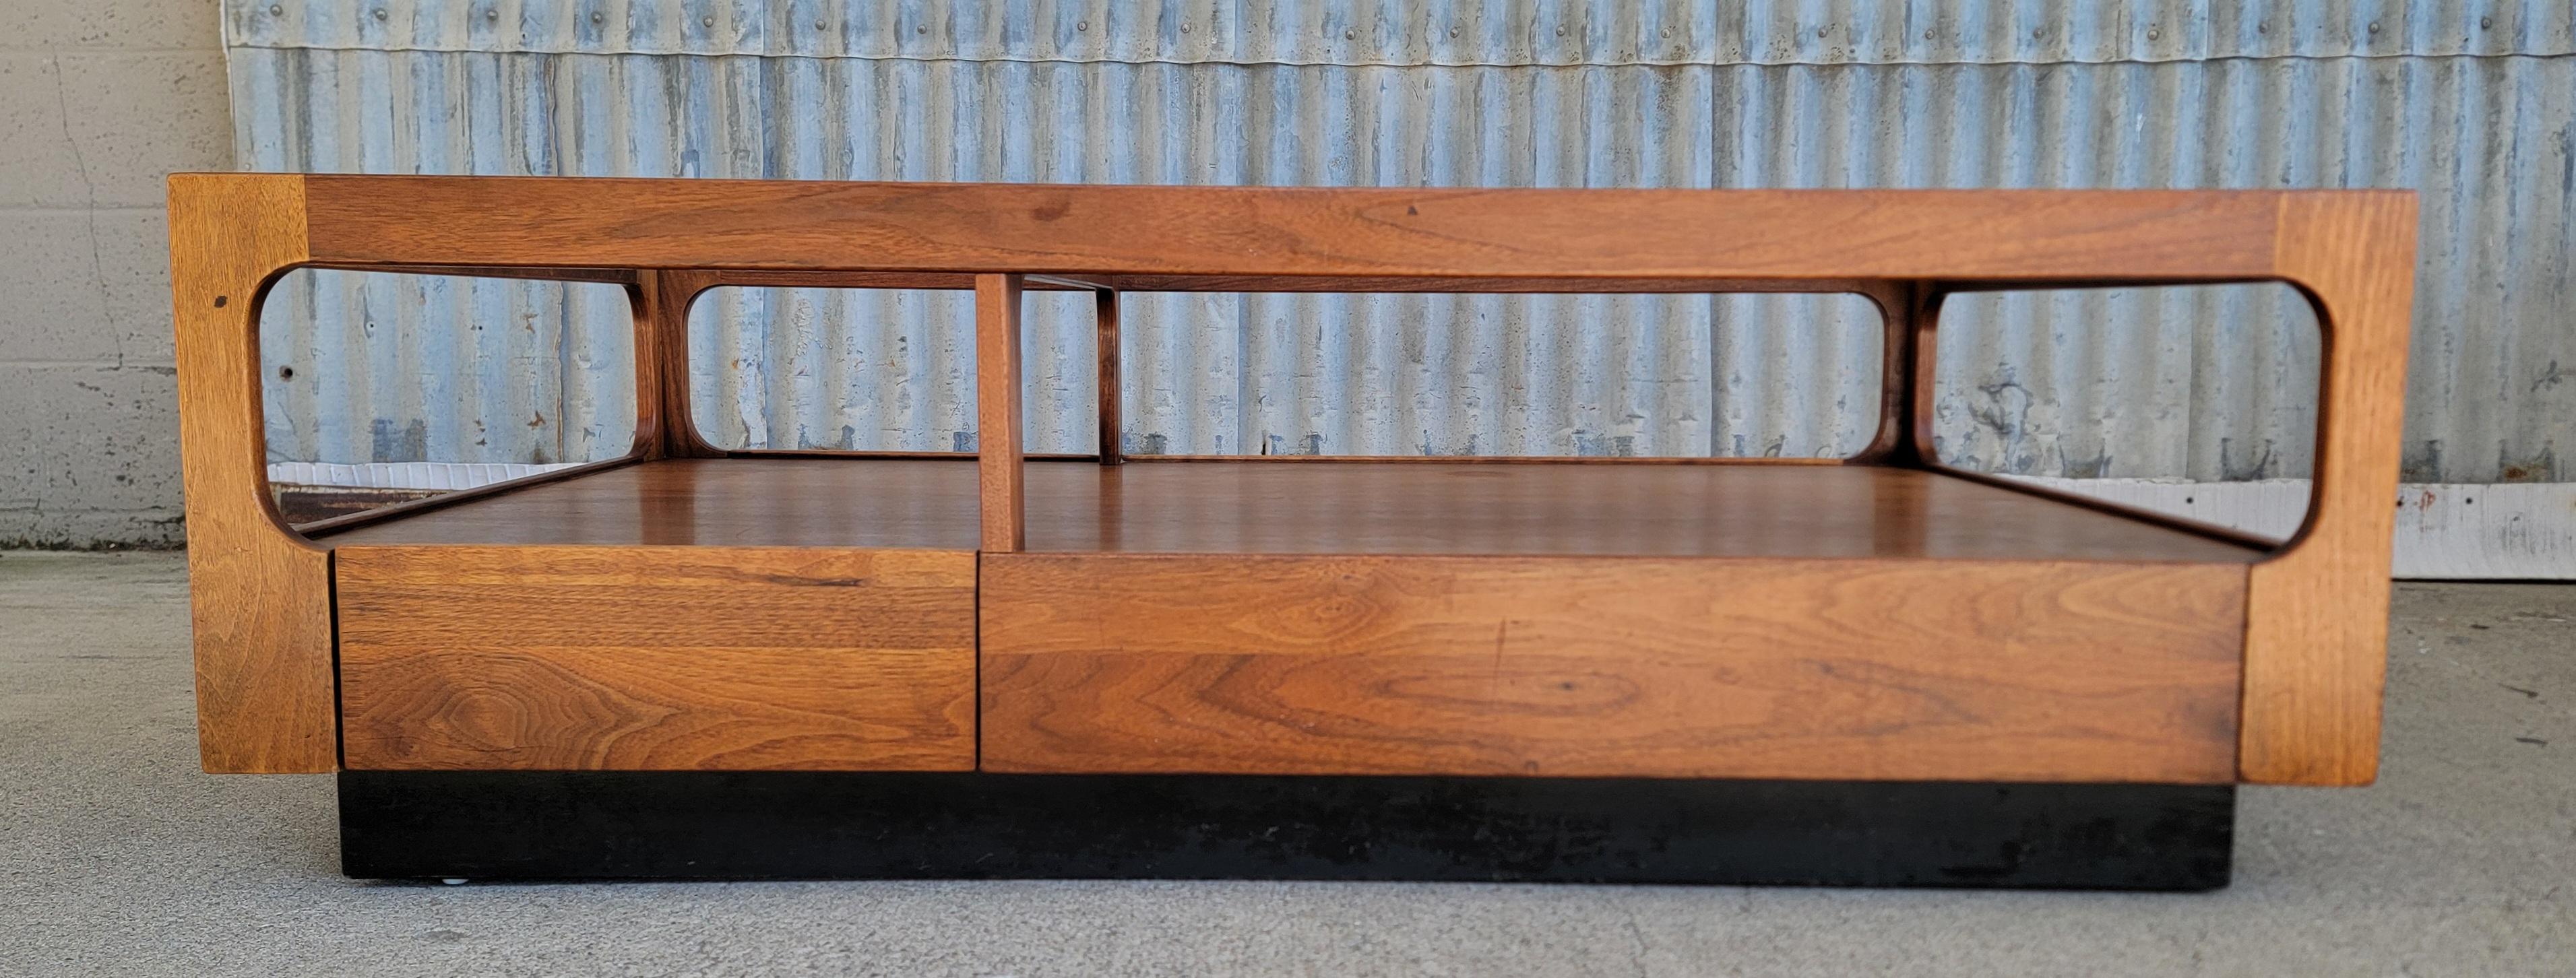 John Keal for Brown Saltman Coffee Table Solid Walnut In Good Condition For Sale In Fulton, CA